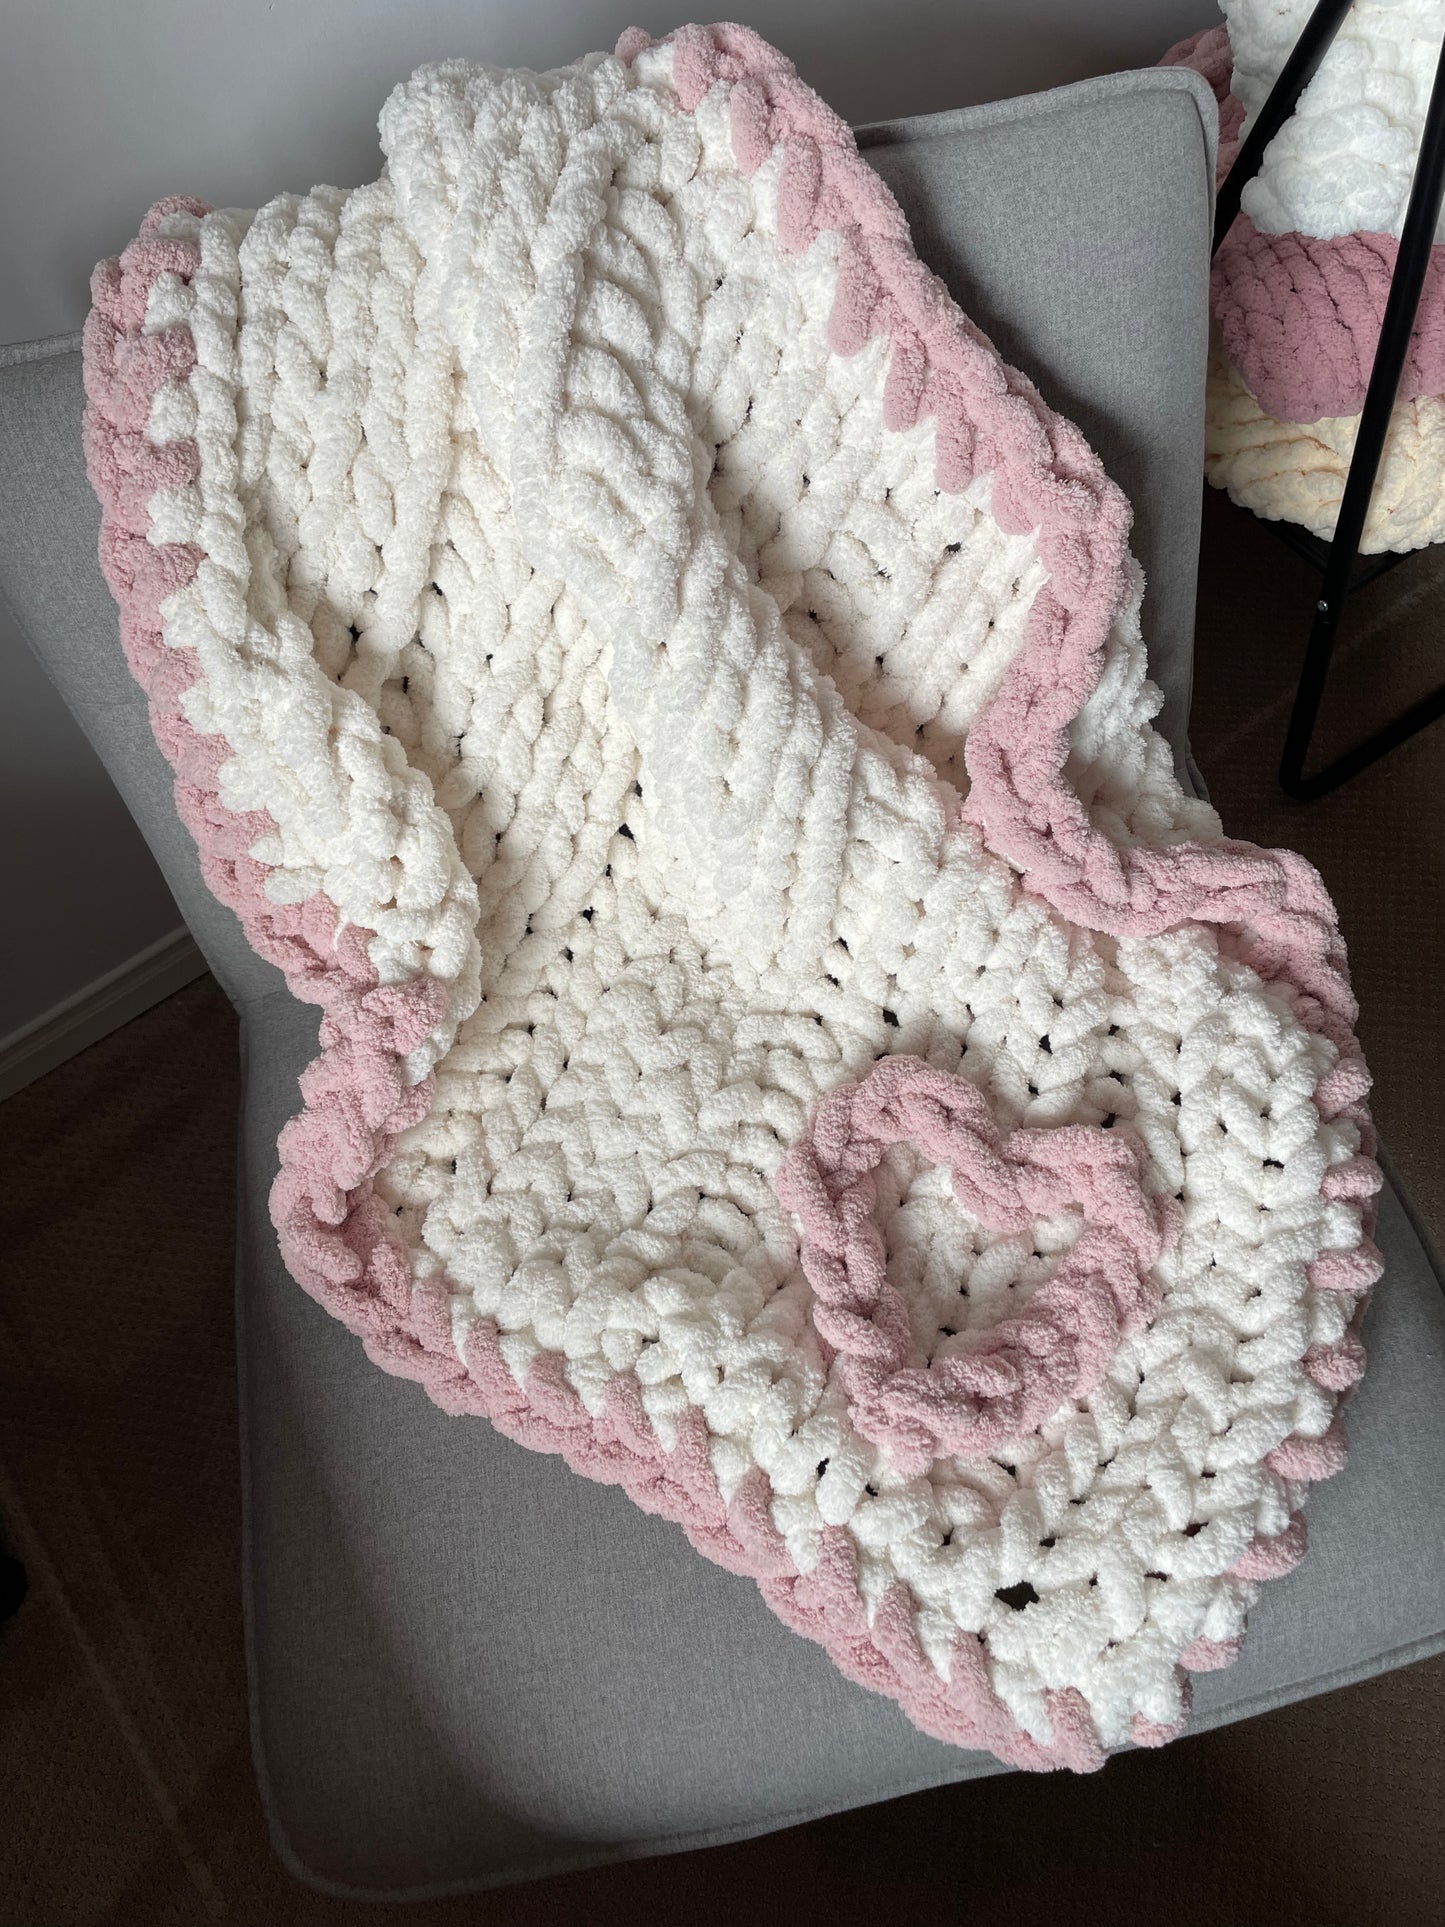 Healing Hand, Chunky Knit Baby Blanket white with Soft Pink Heart